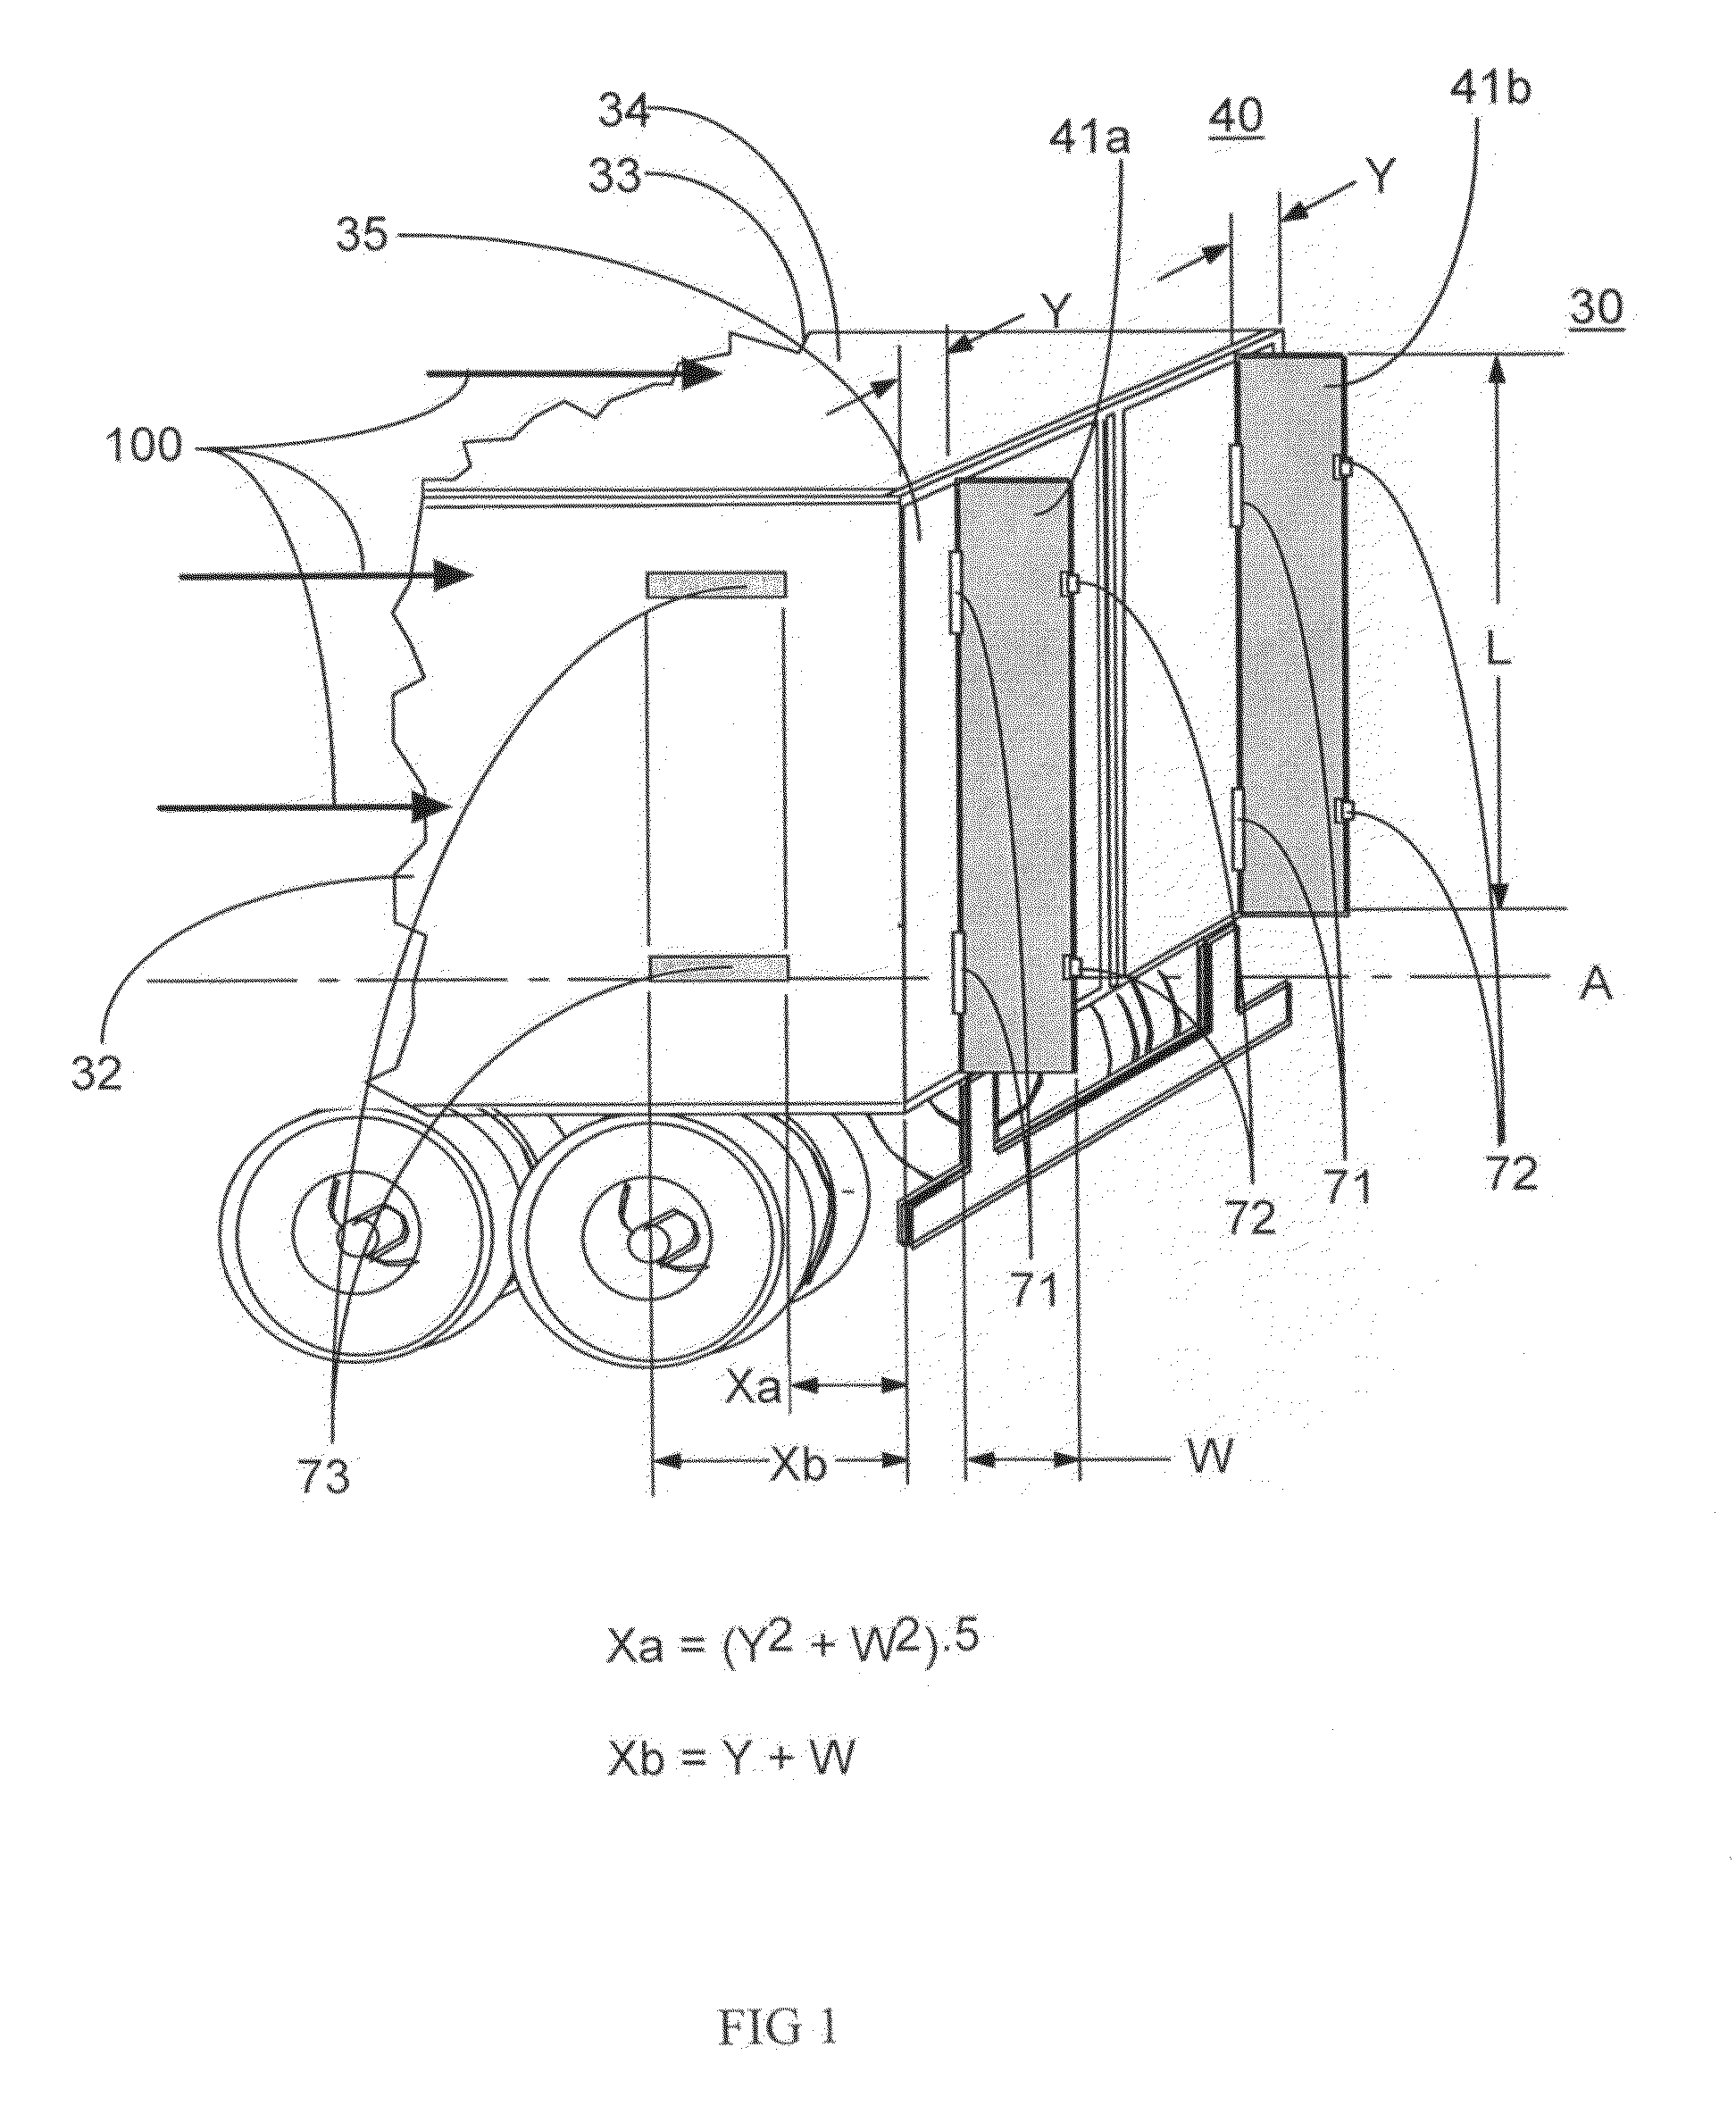 Wake stabilization device and method for reducing the aerodynamic drag of ground vehicles